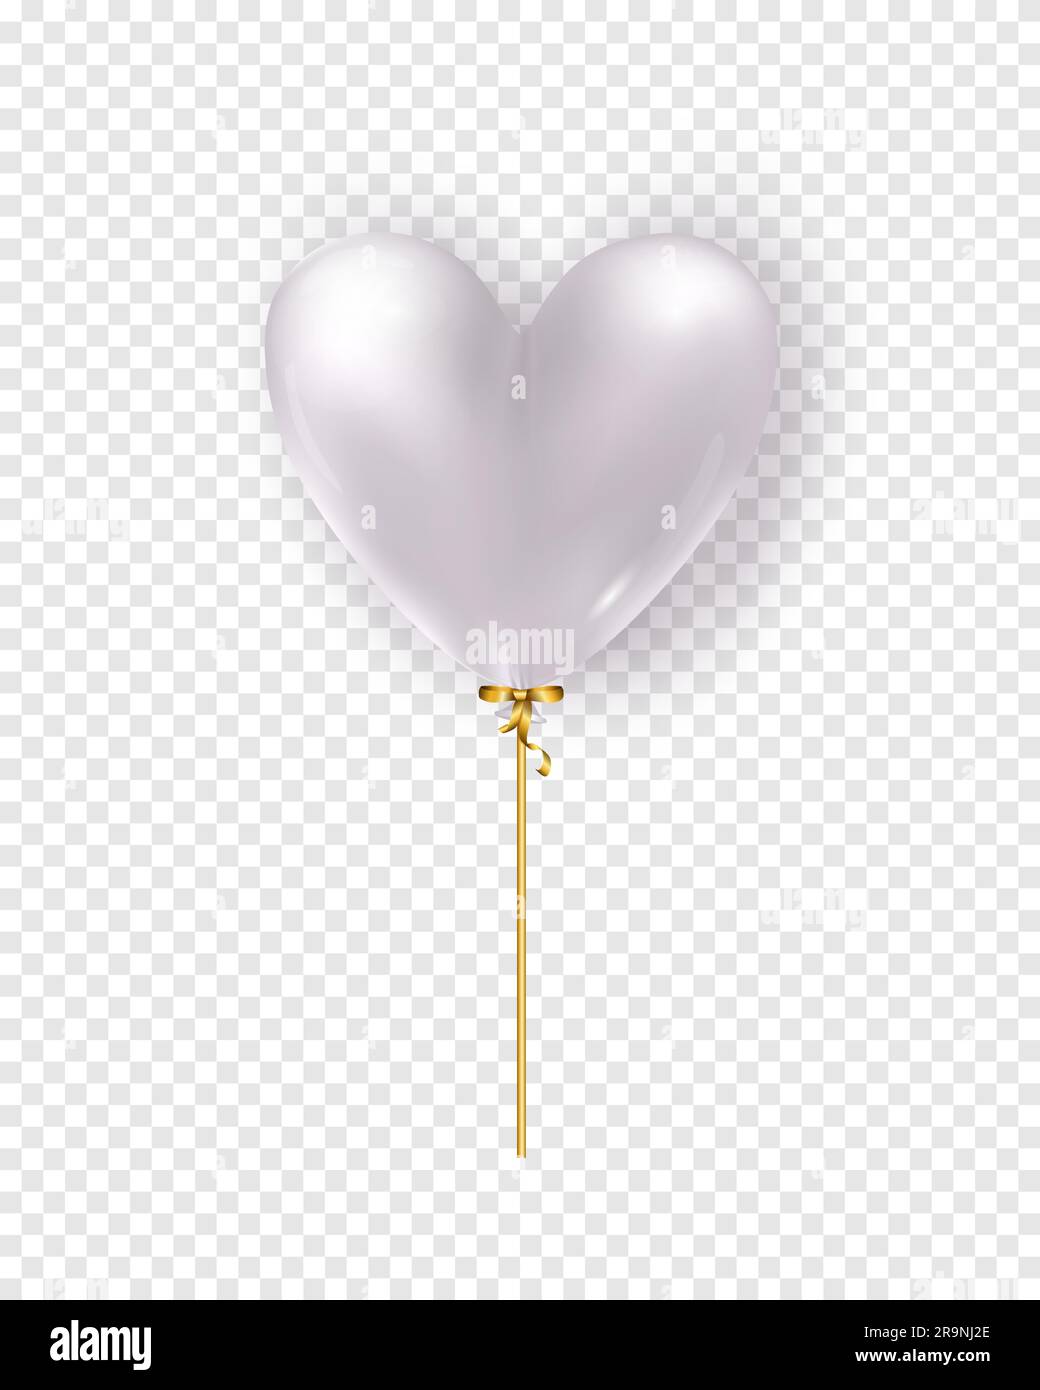 Vector glossy white air balloon in heart form. Illustration of realistic air 3d balloon isolated on transparent background. Stock Vector